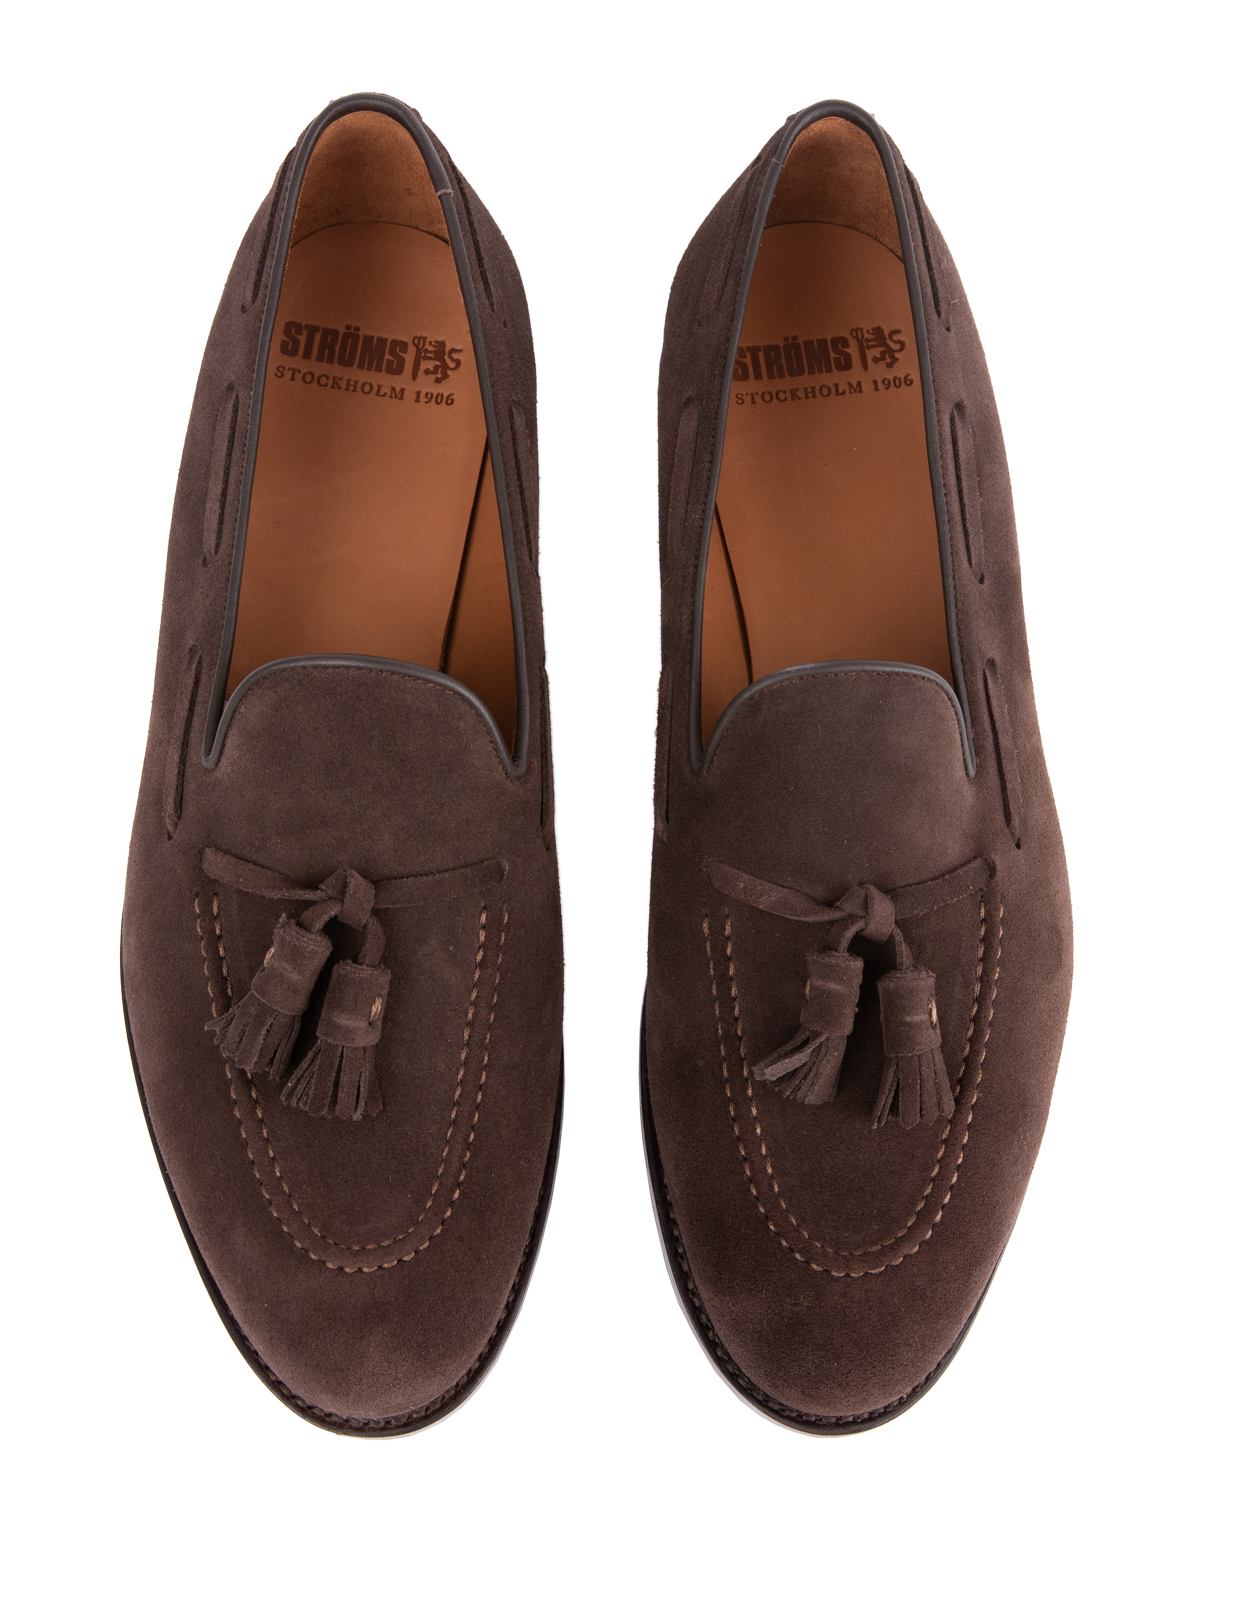 Tassel Loafers Suede Bitter Chocolate Stl 12